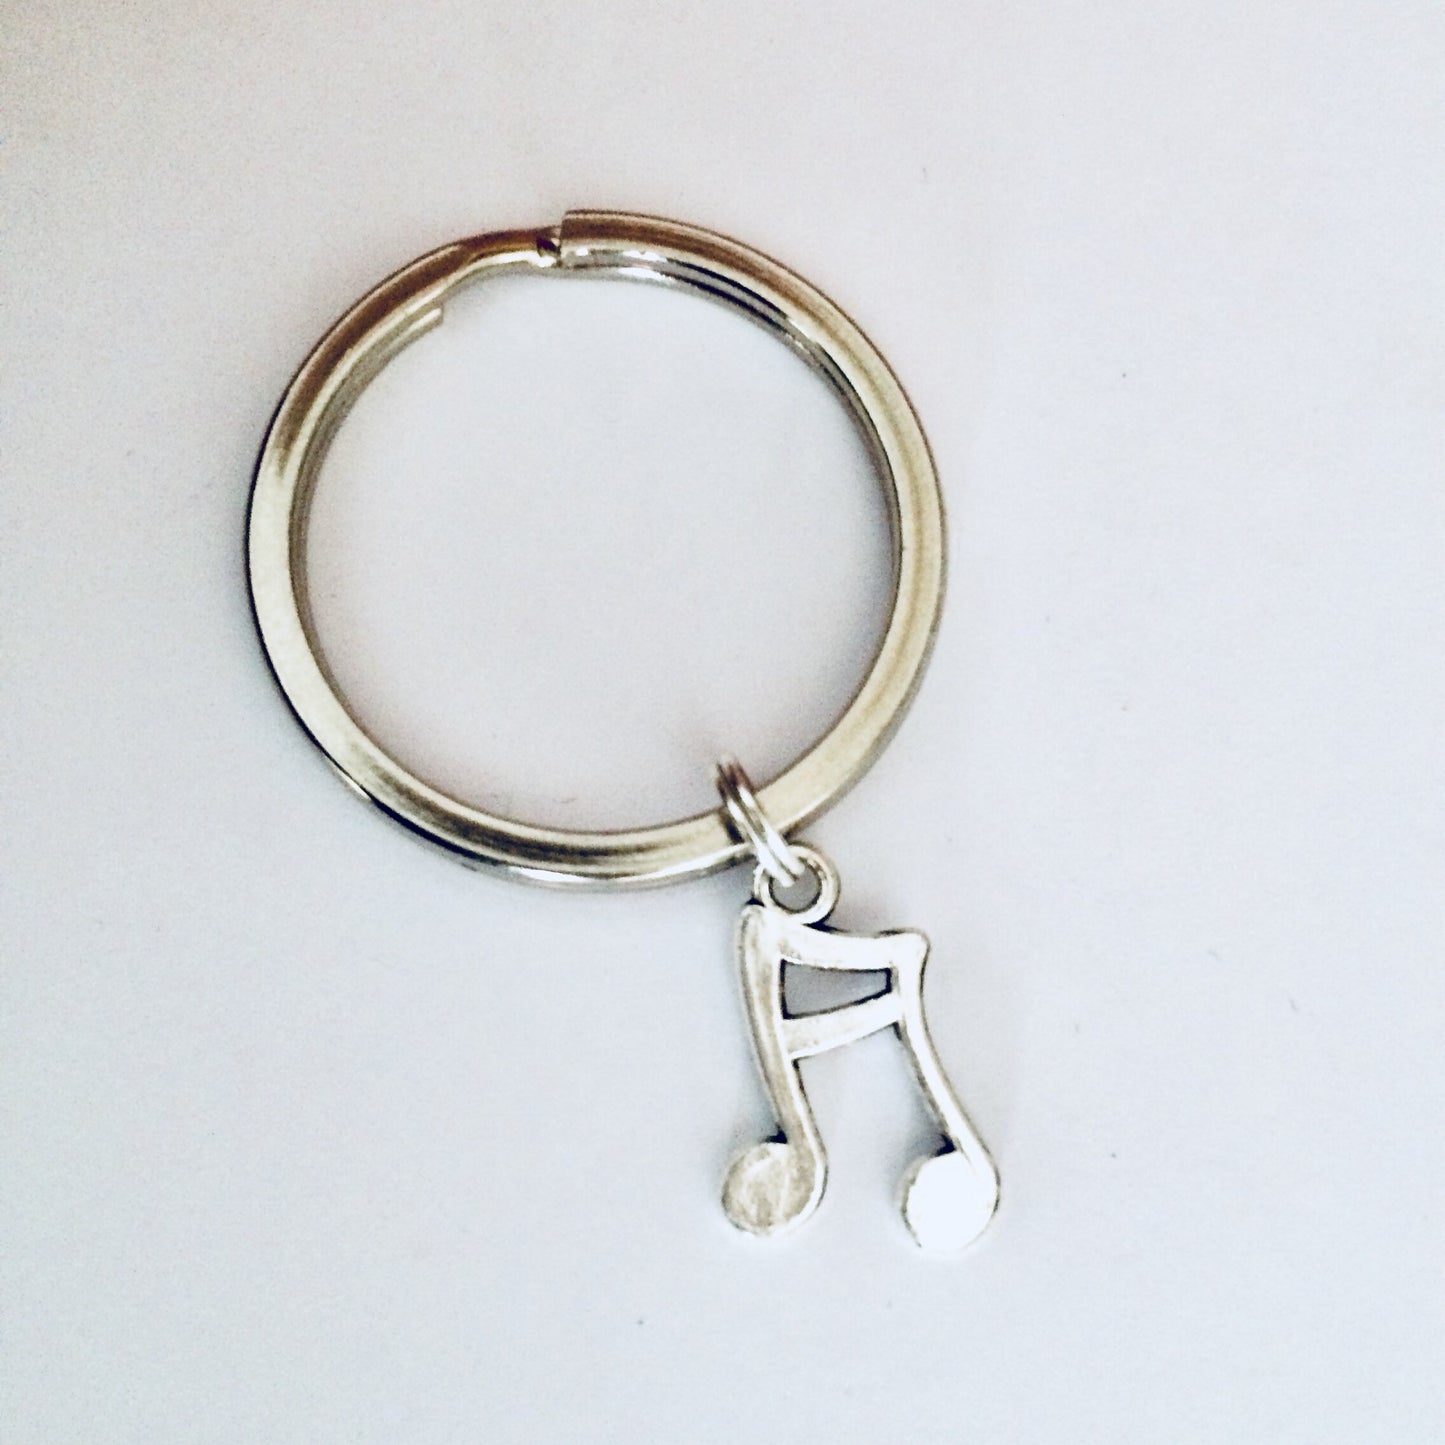 Music Note Keychains, Music Note Keyrings, Music Note Gifts, Musician Gift, Music Student, Music Note Charm, Music Note Jewelry.